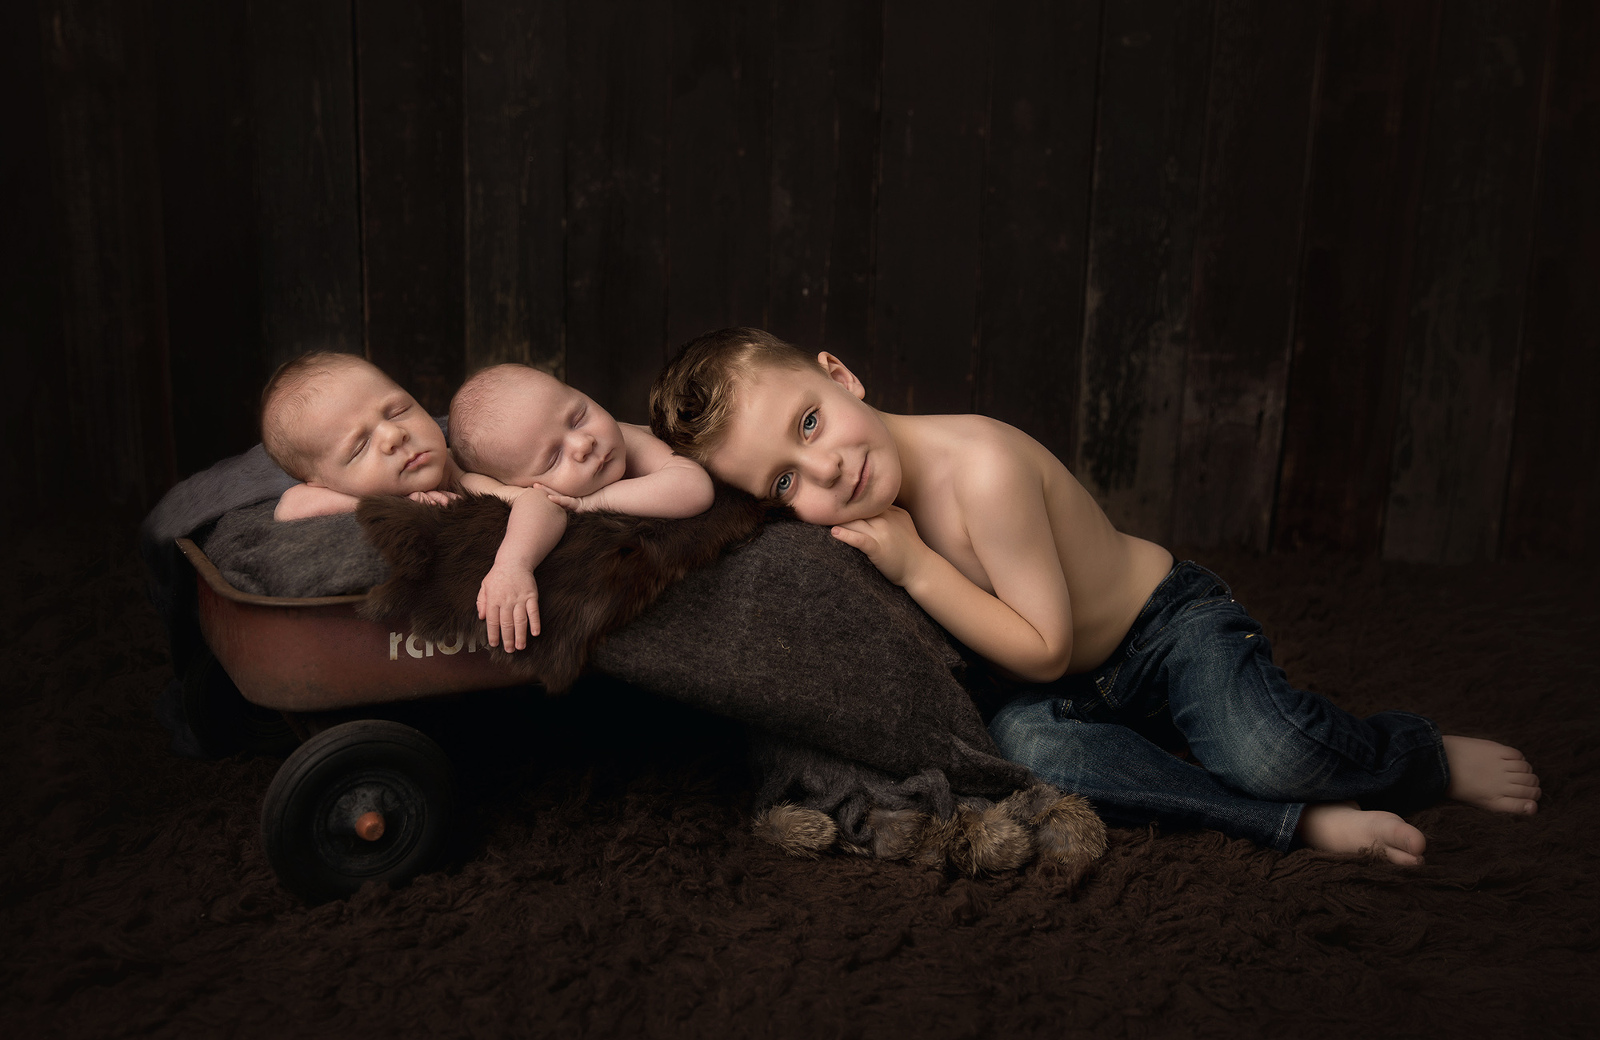 Studio newborn twins portrait session from the side with dark background of a proud older toddler brother lying down near his newborn twin siblings who are sleeping together on an antique wagon. Image by Helga Himer Photography, Sudbury, Ontario.